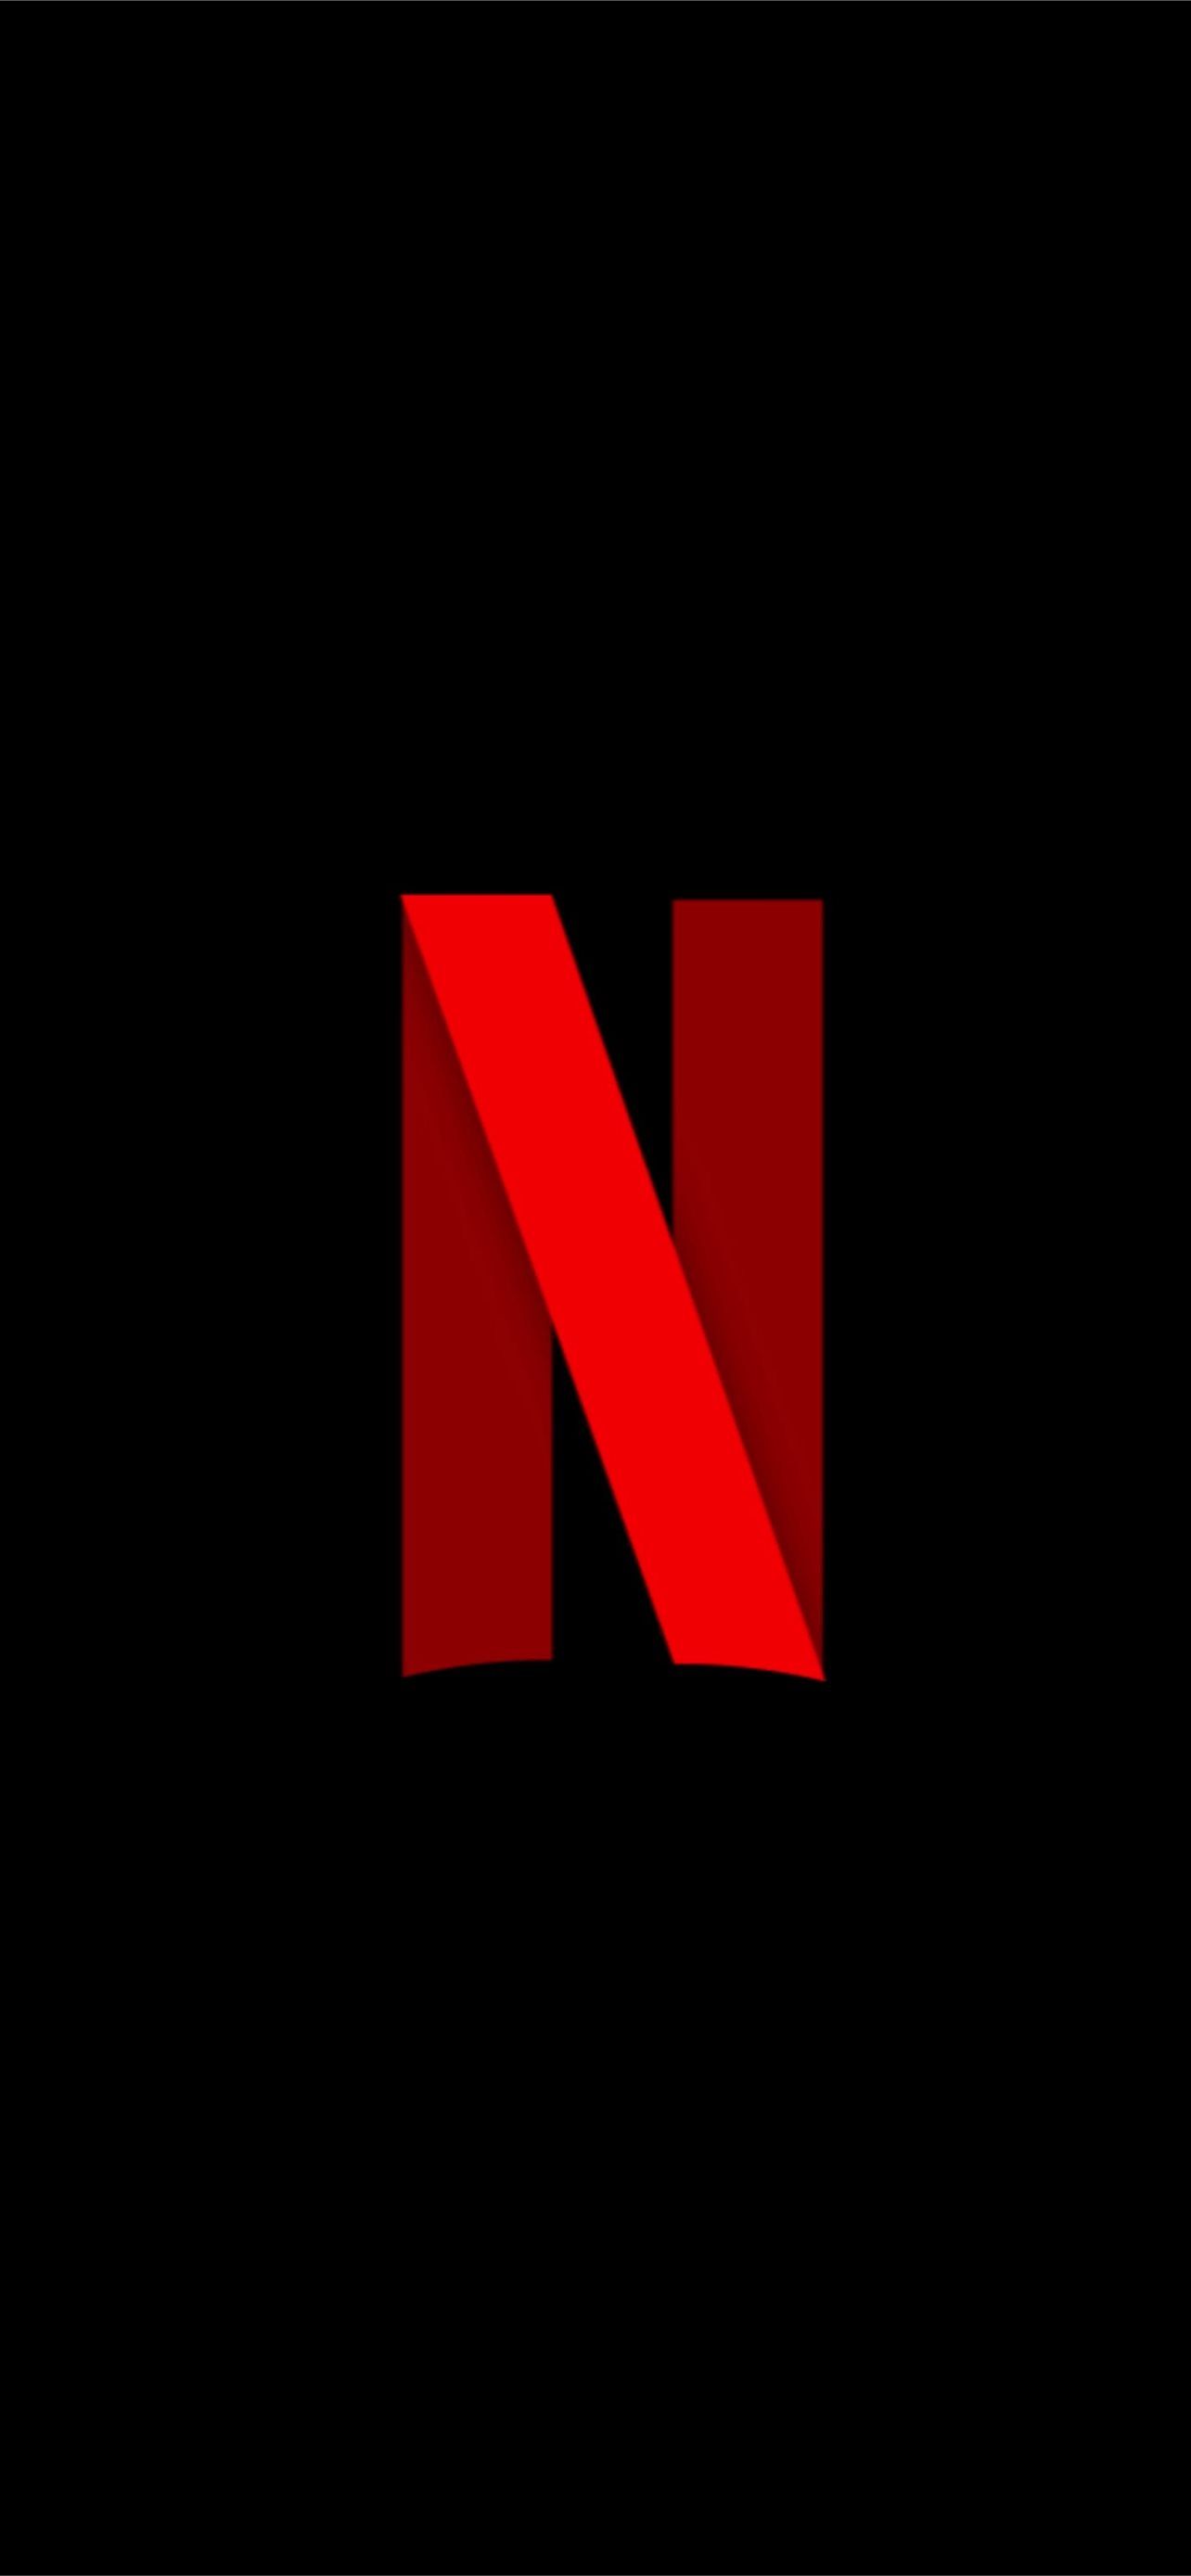 Netflix logo with the letter N in red against a black background - Netflix